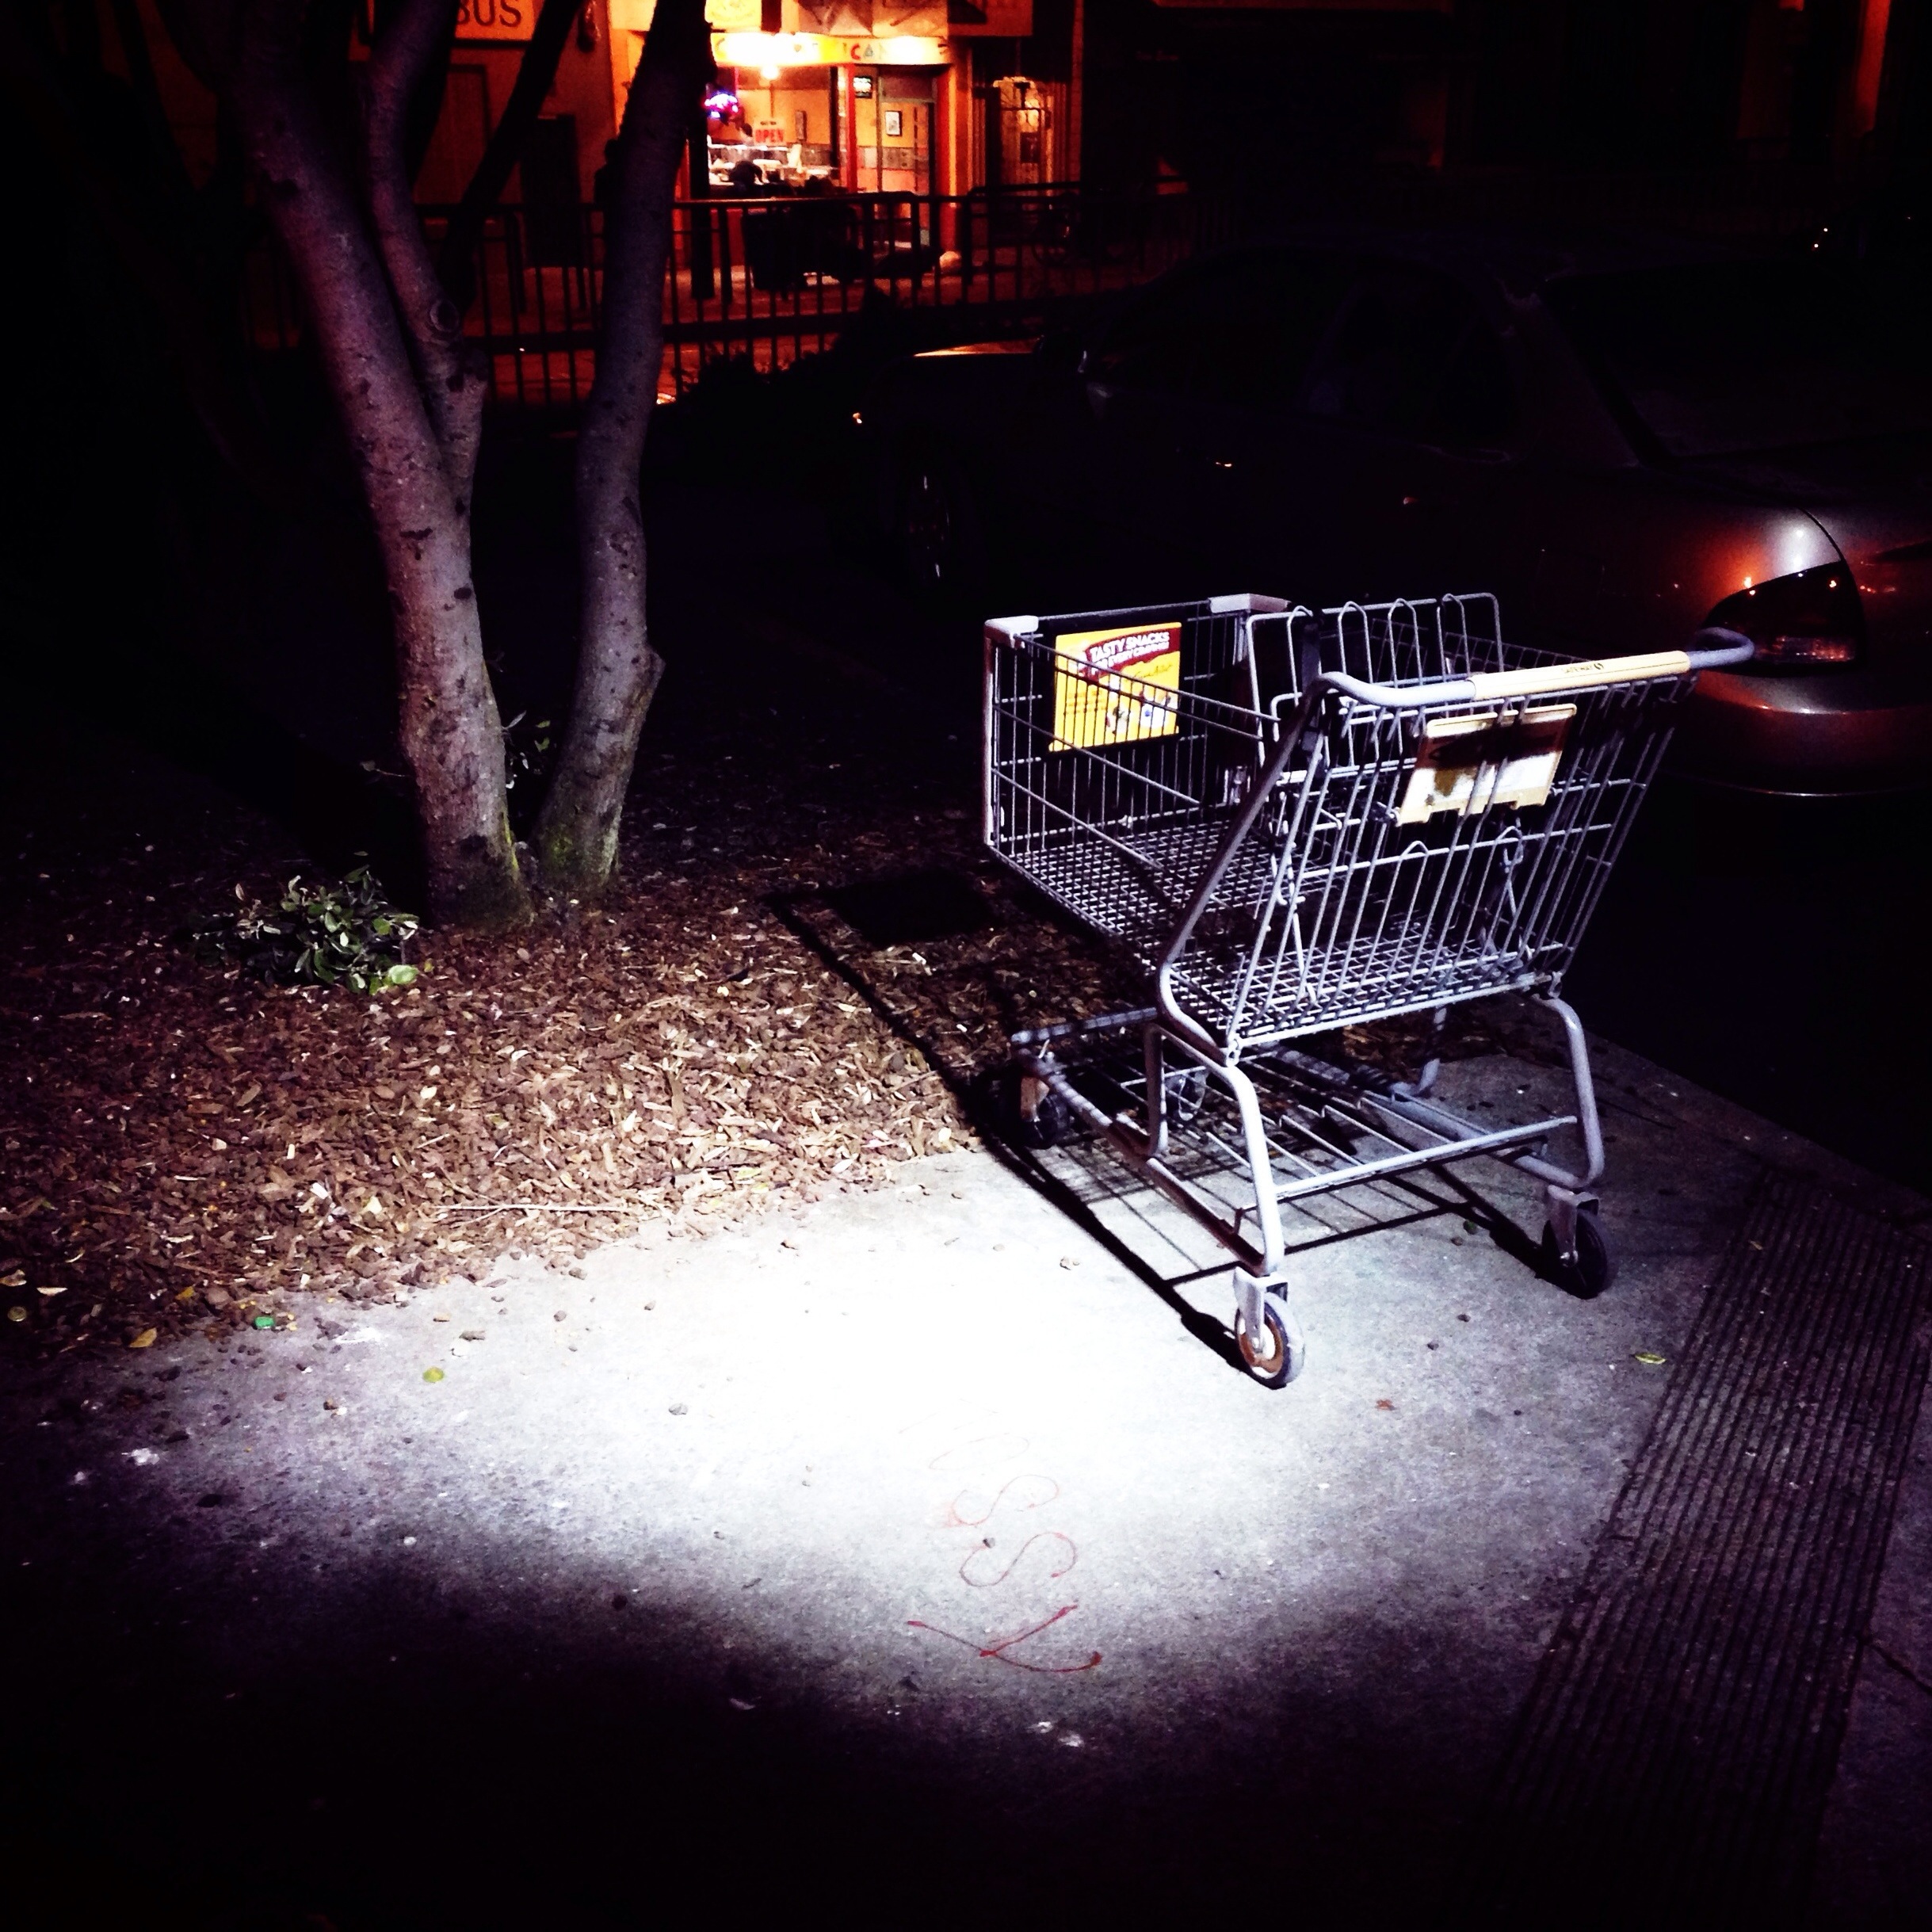 Shopping cart abandonment is cruel - here's how to stop it